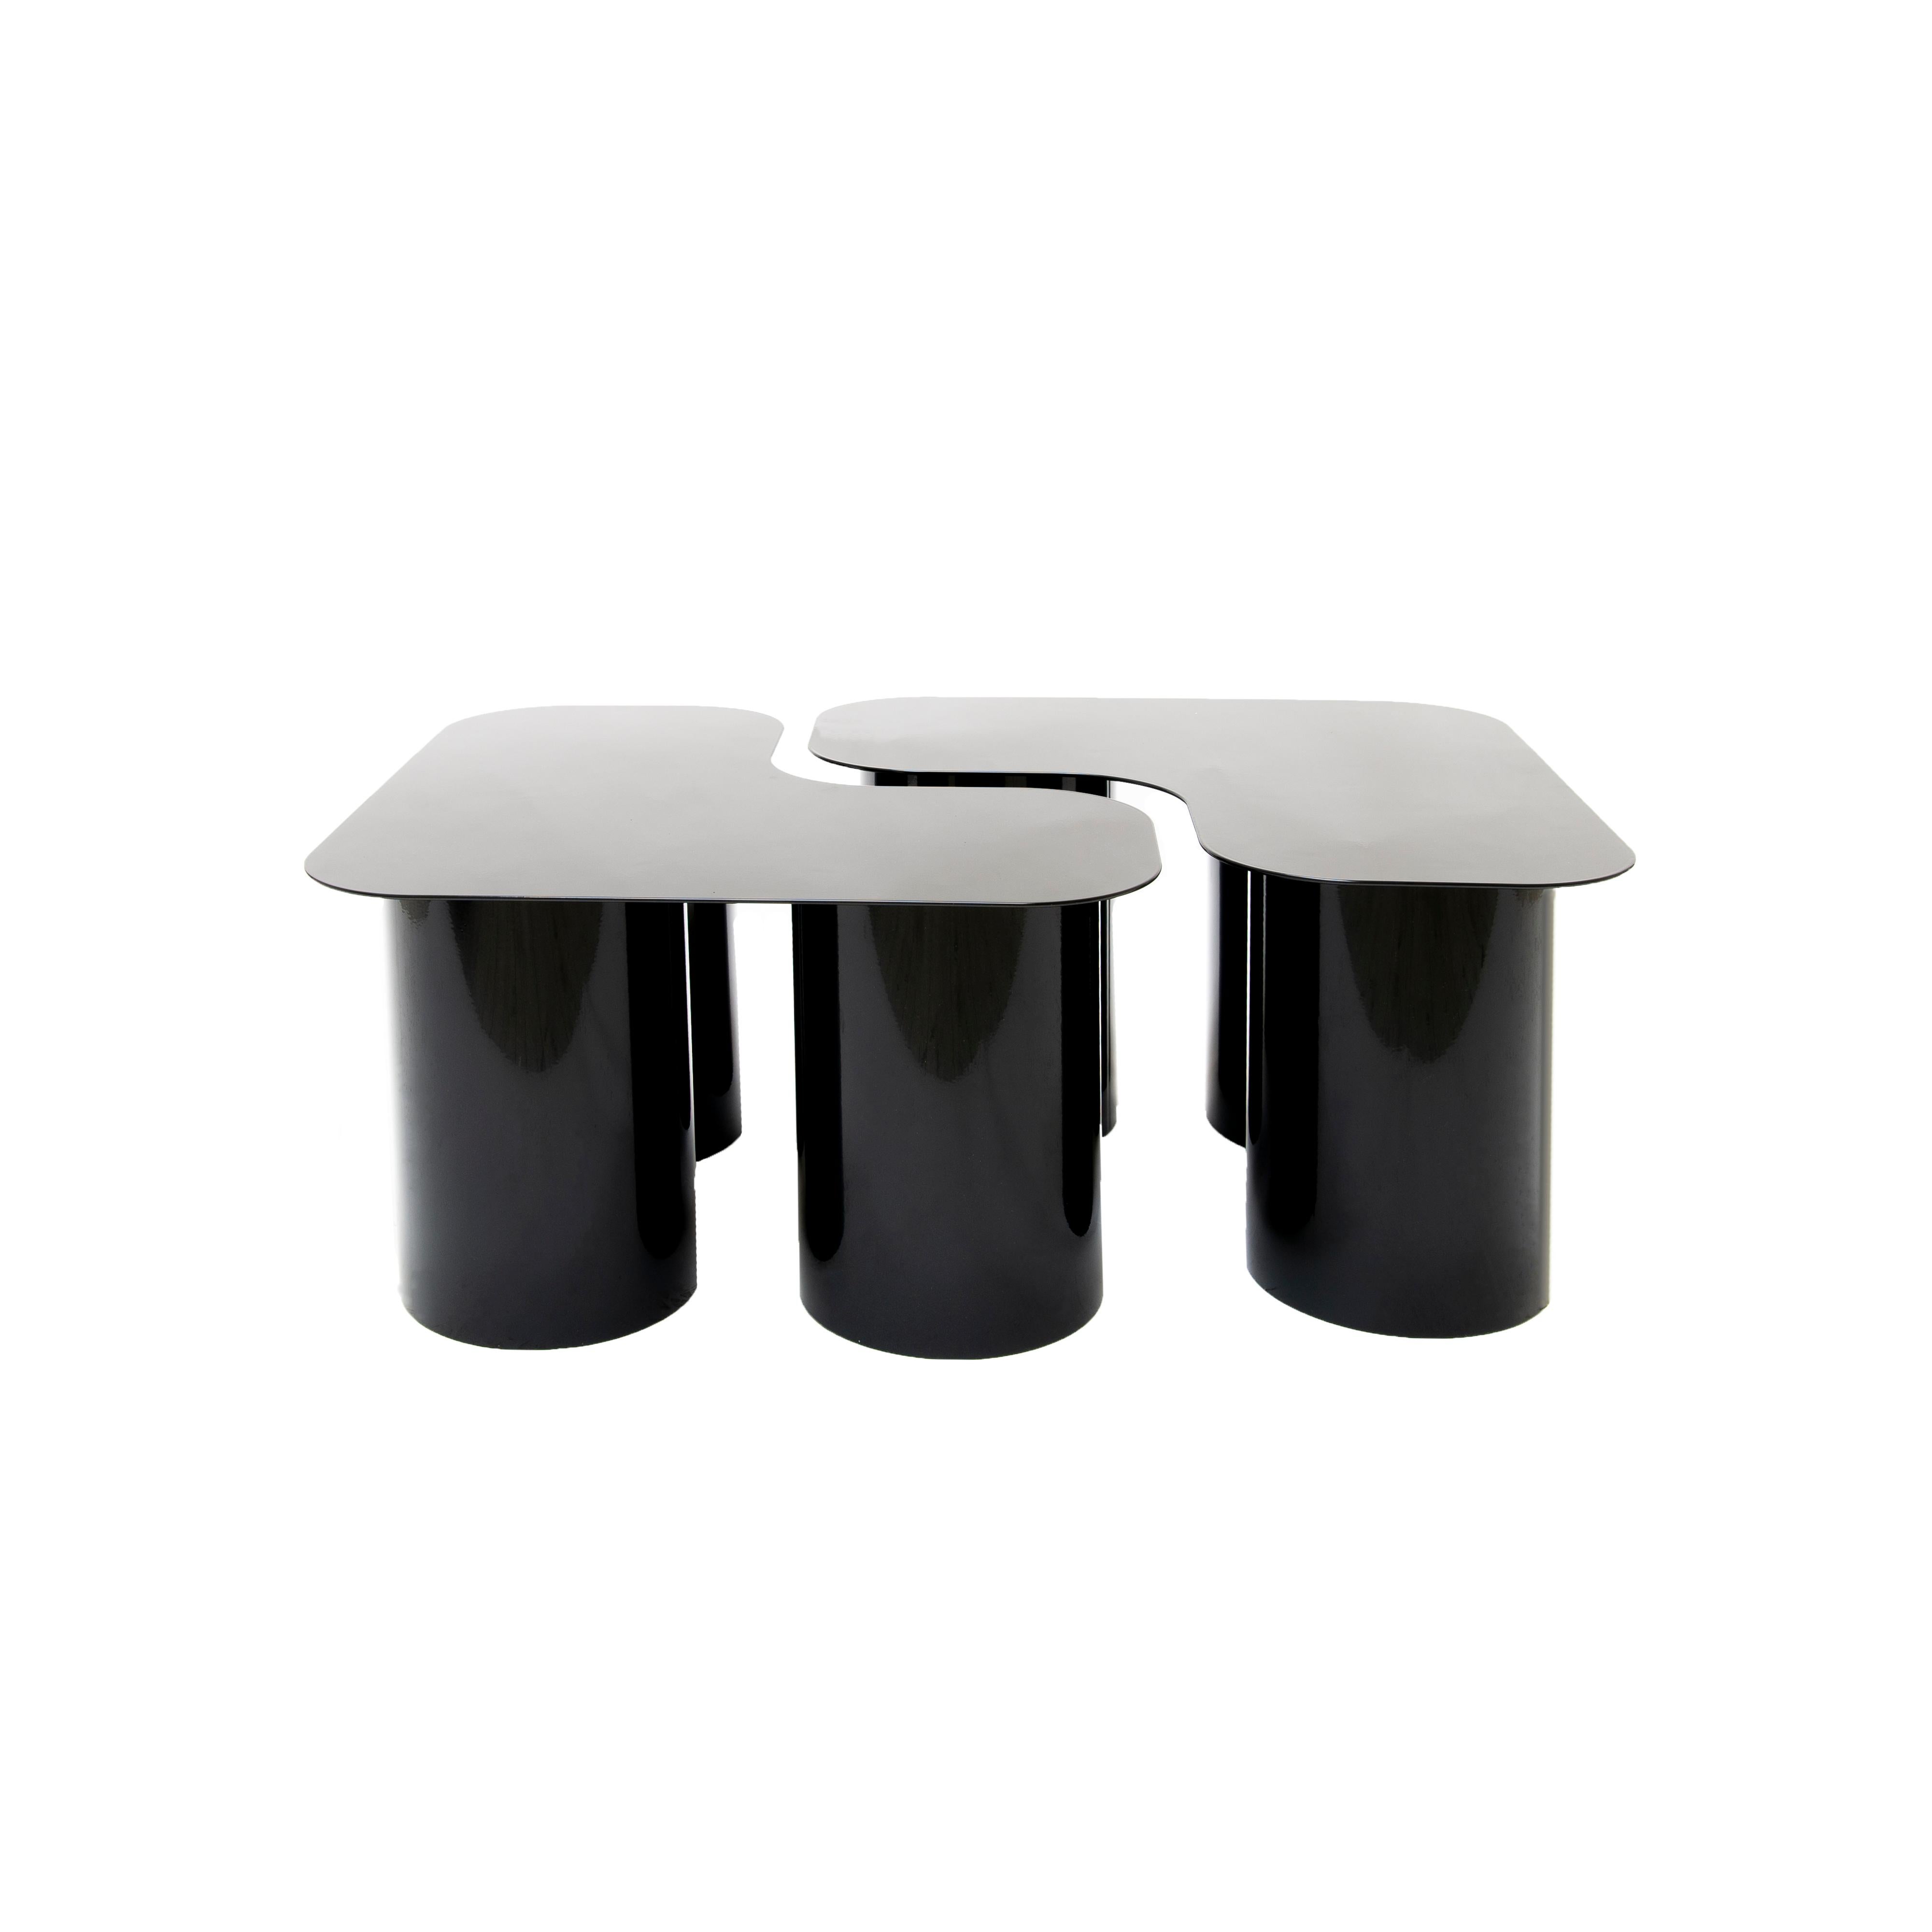 Set of 2 object 069 coffee tables by NG Design
Dimensions: D120 x W60 x H35 cm.
Materials: Powder coated steel.

Also available: All of objects available in different materials and colors on demand.

The Object069 table is a game of form. The